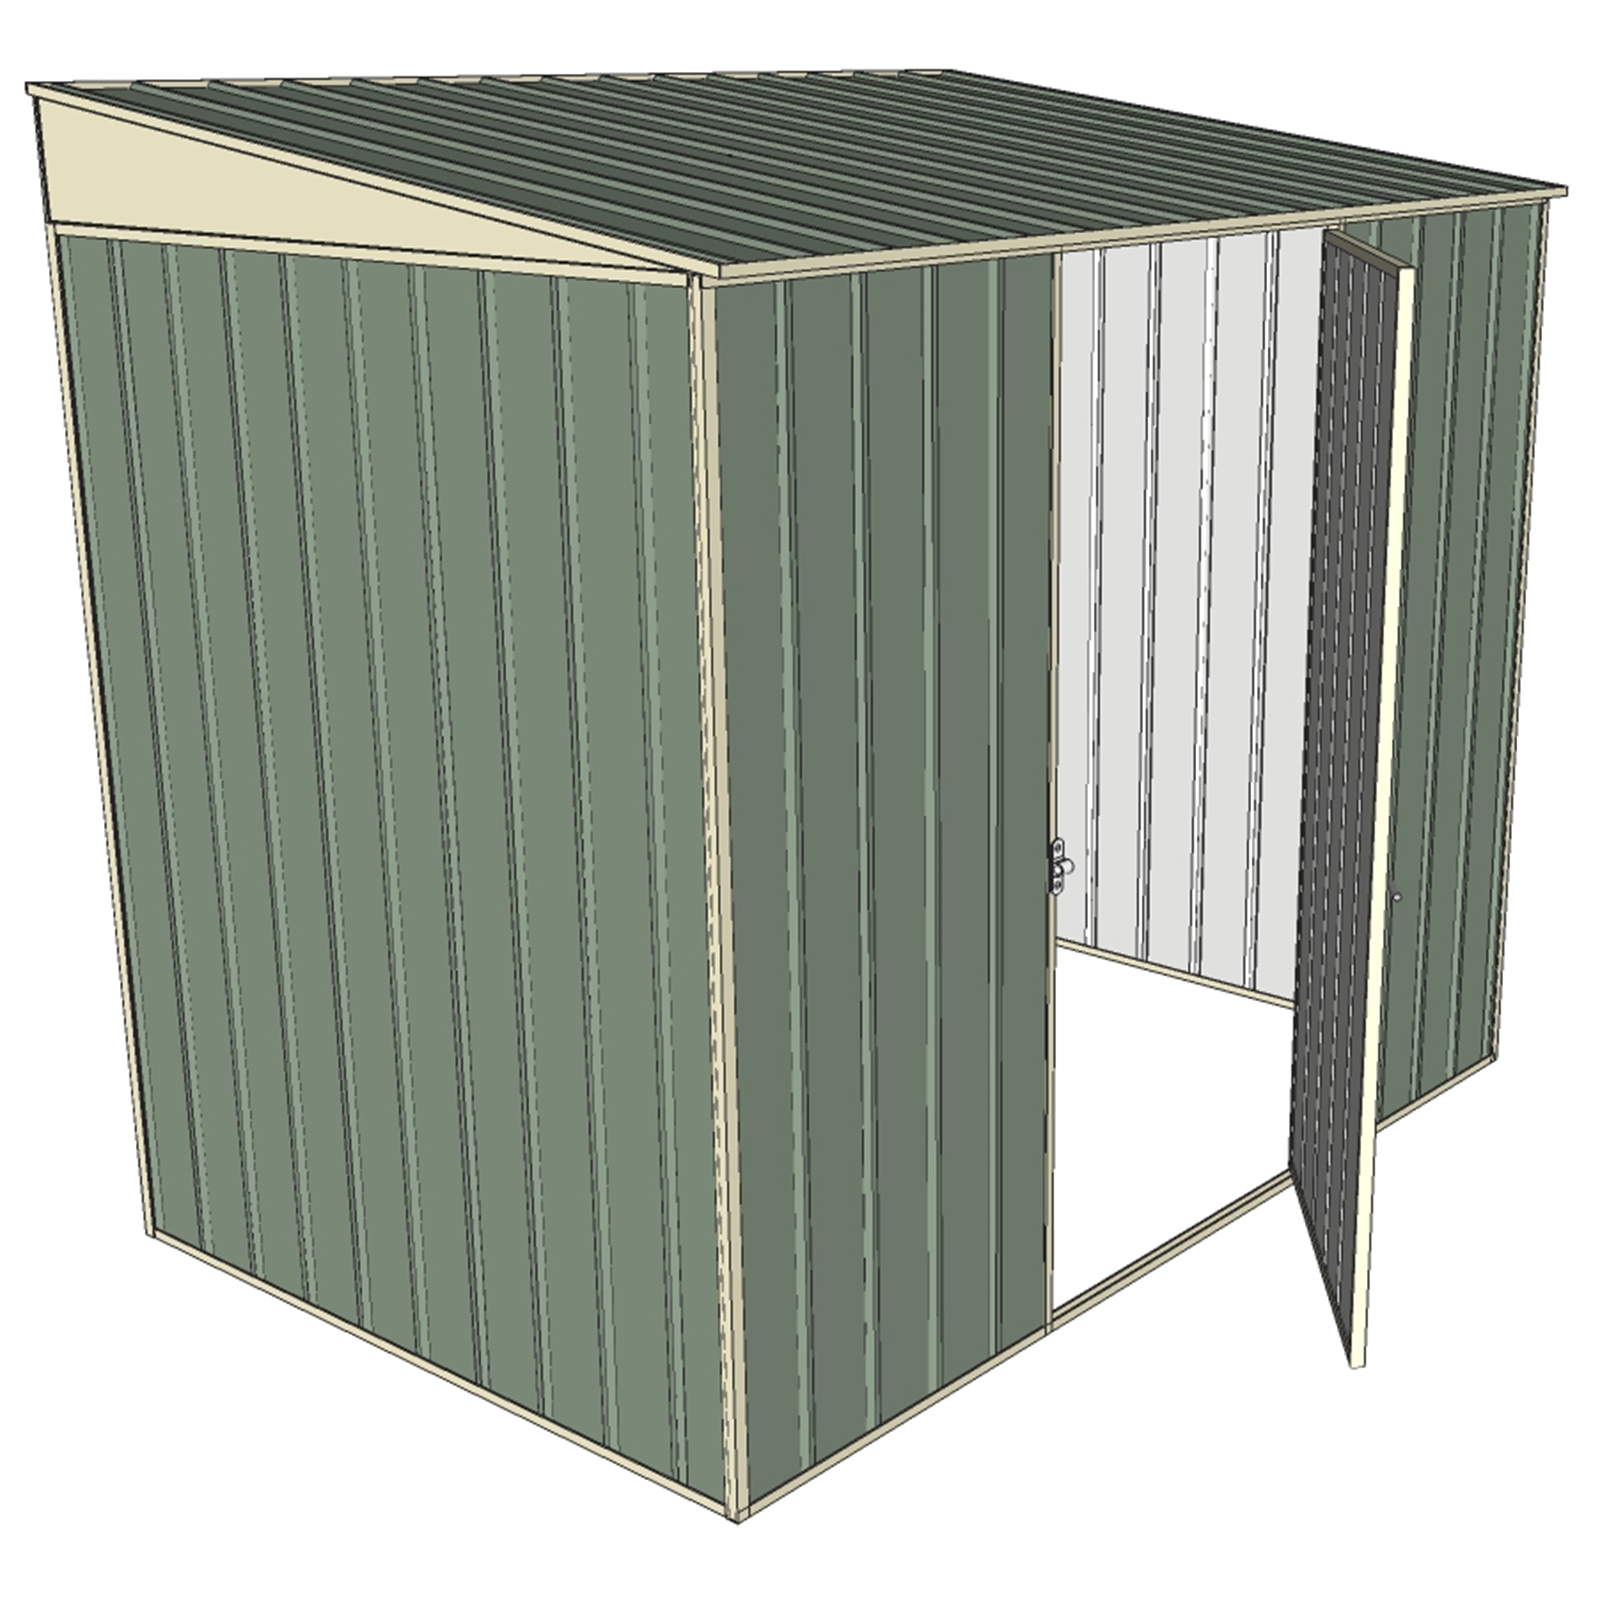 Build-a-Shed 2.3 x 1.5m Green Skillion Single Hinged Door Narrow Shed